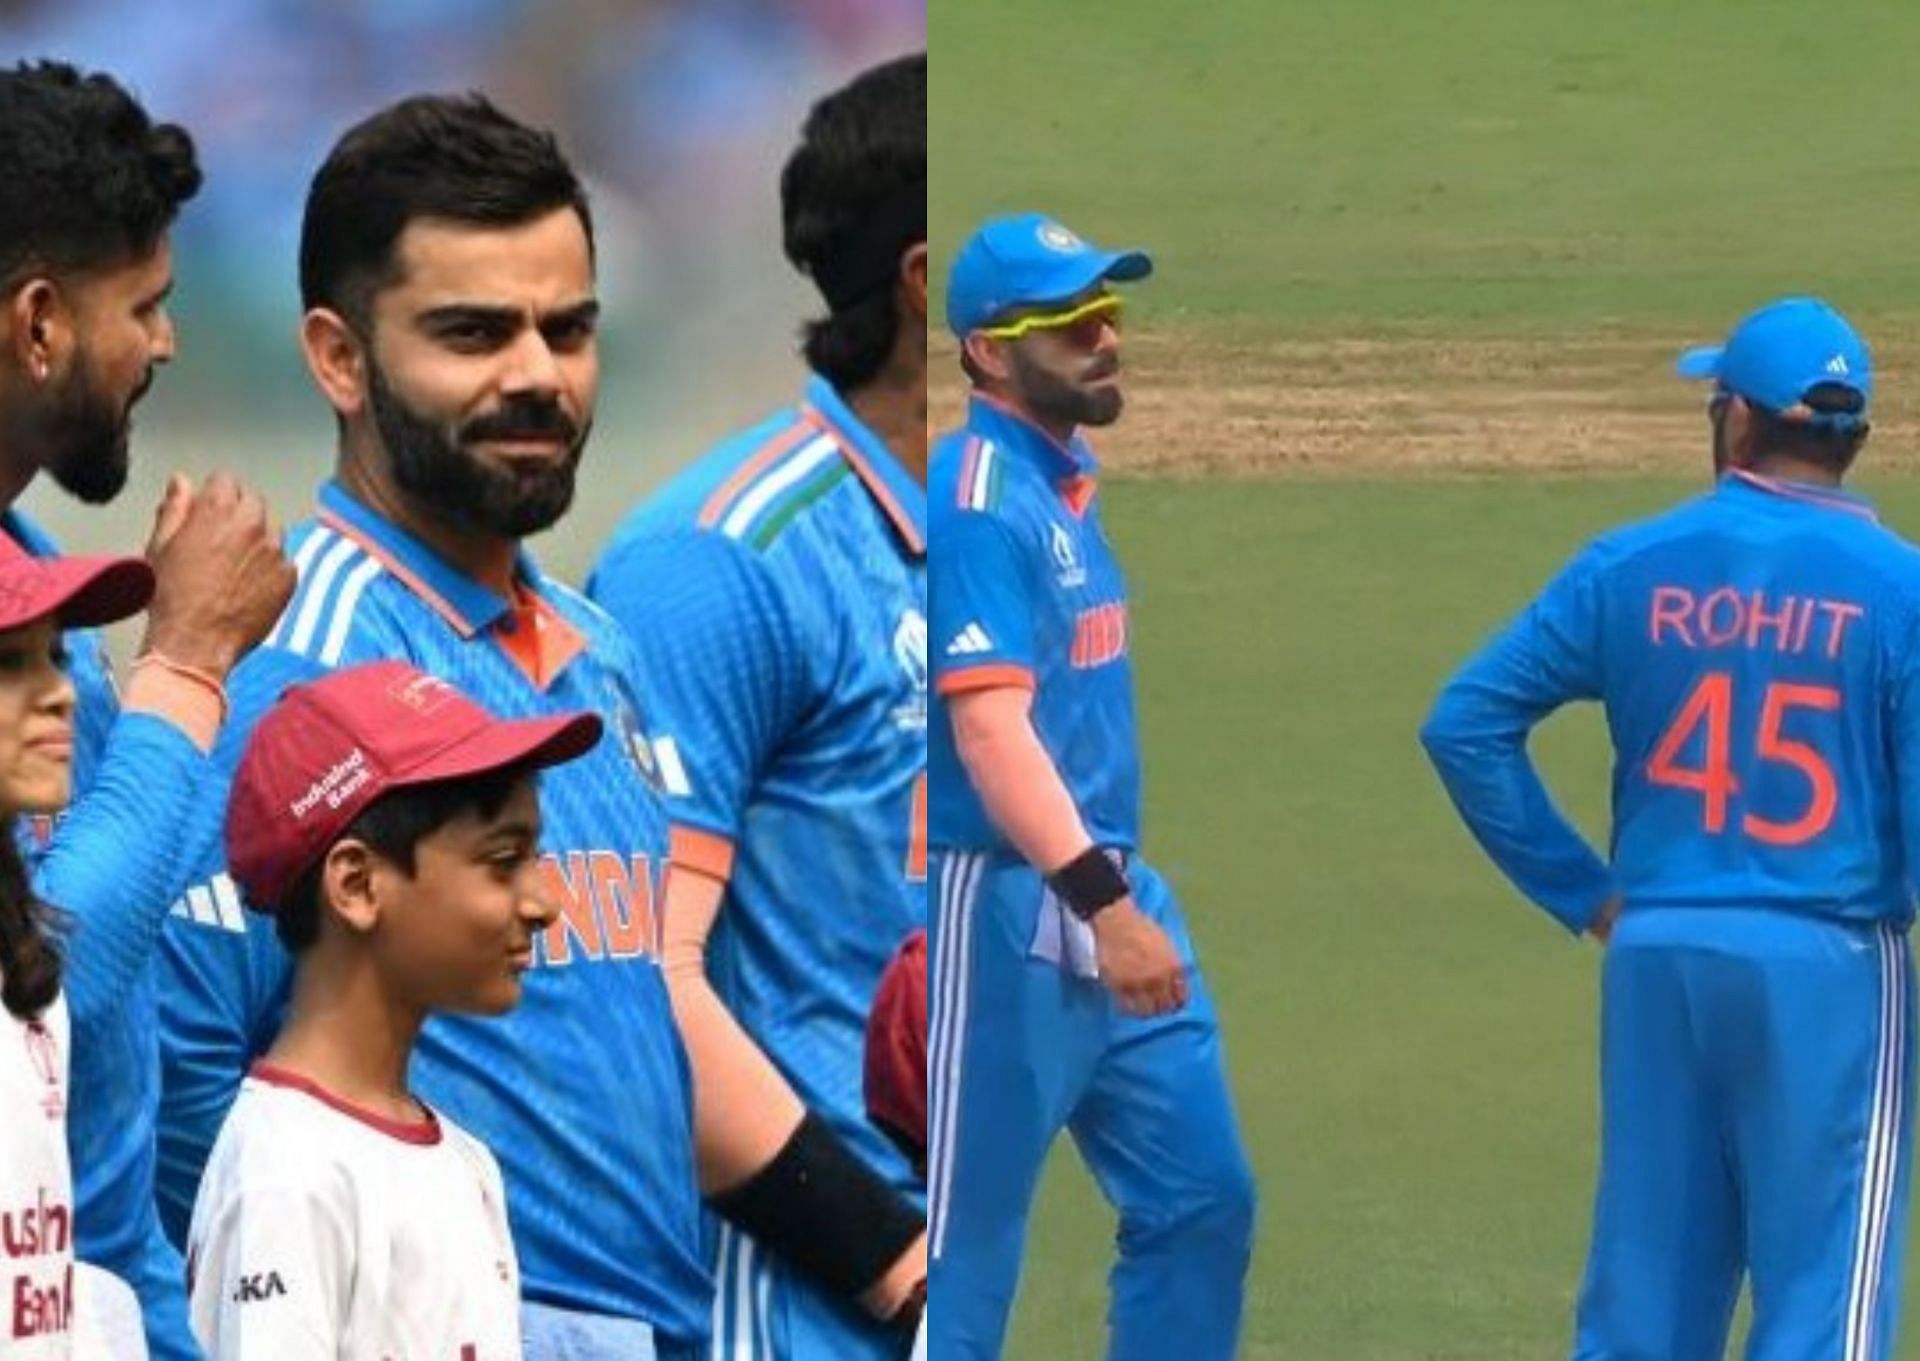 Virat Kohli wore a different jersey for a while on Saturday before changing back to Tri color stripes jersey. 